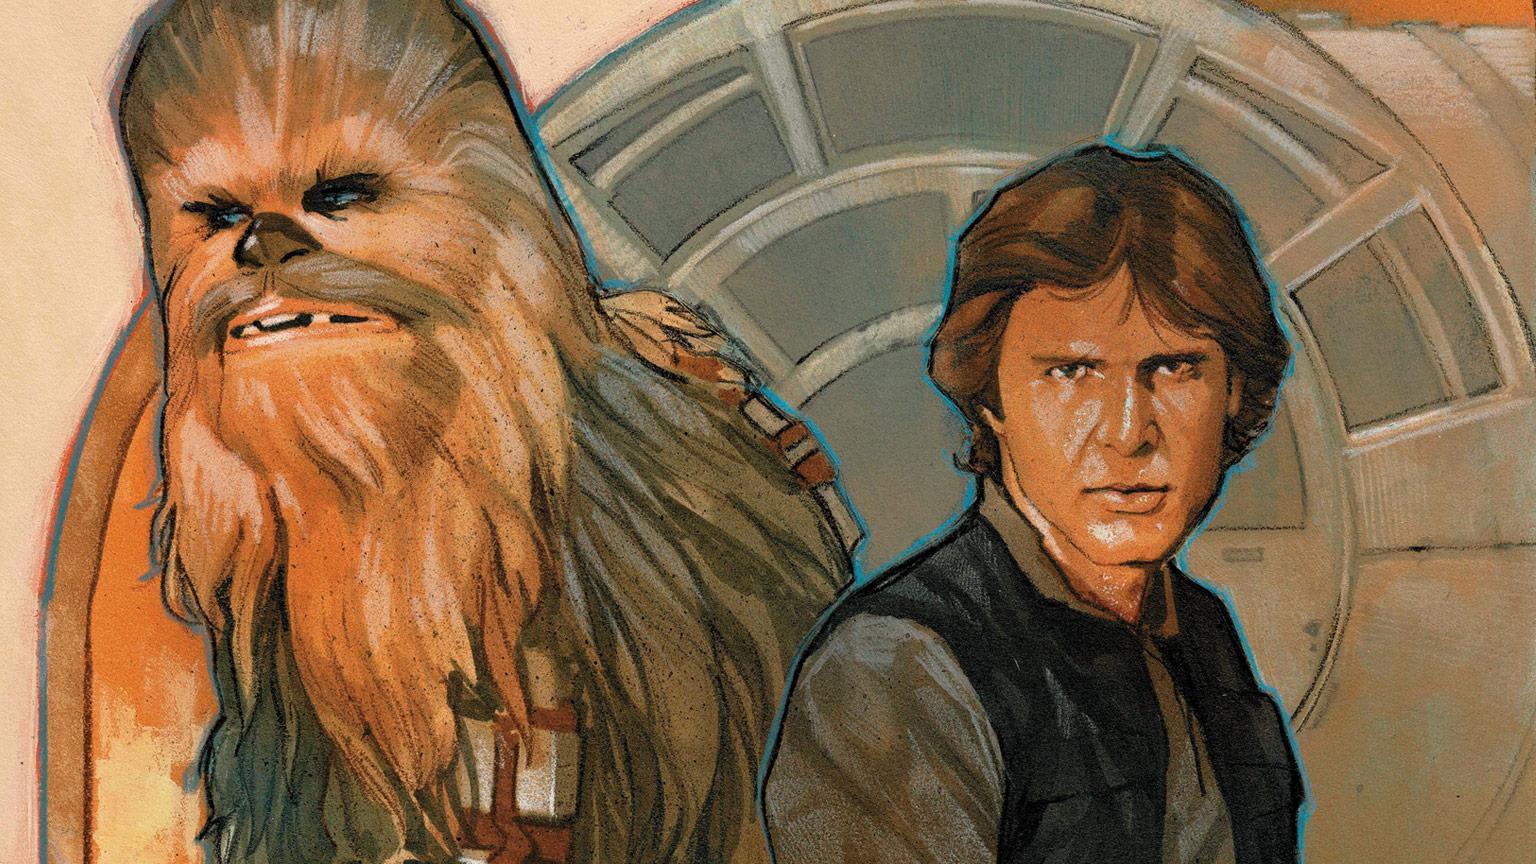 Han Solo and Chewie comic book cover